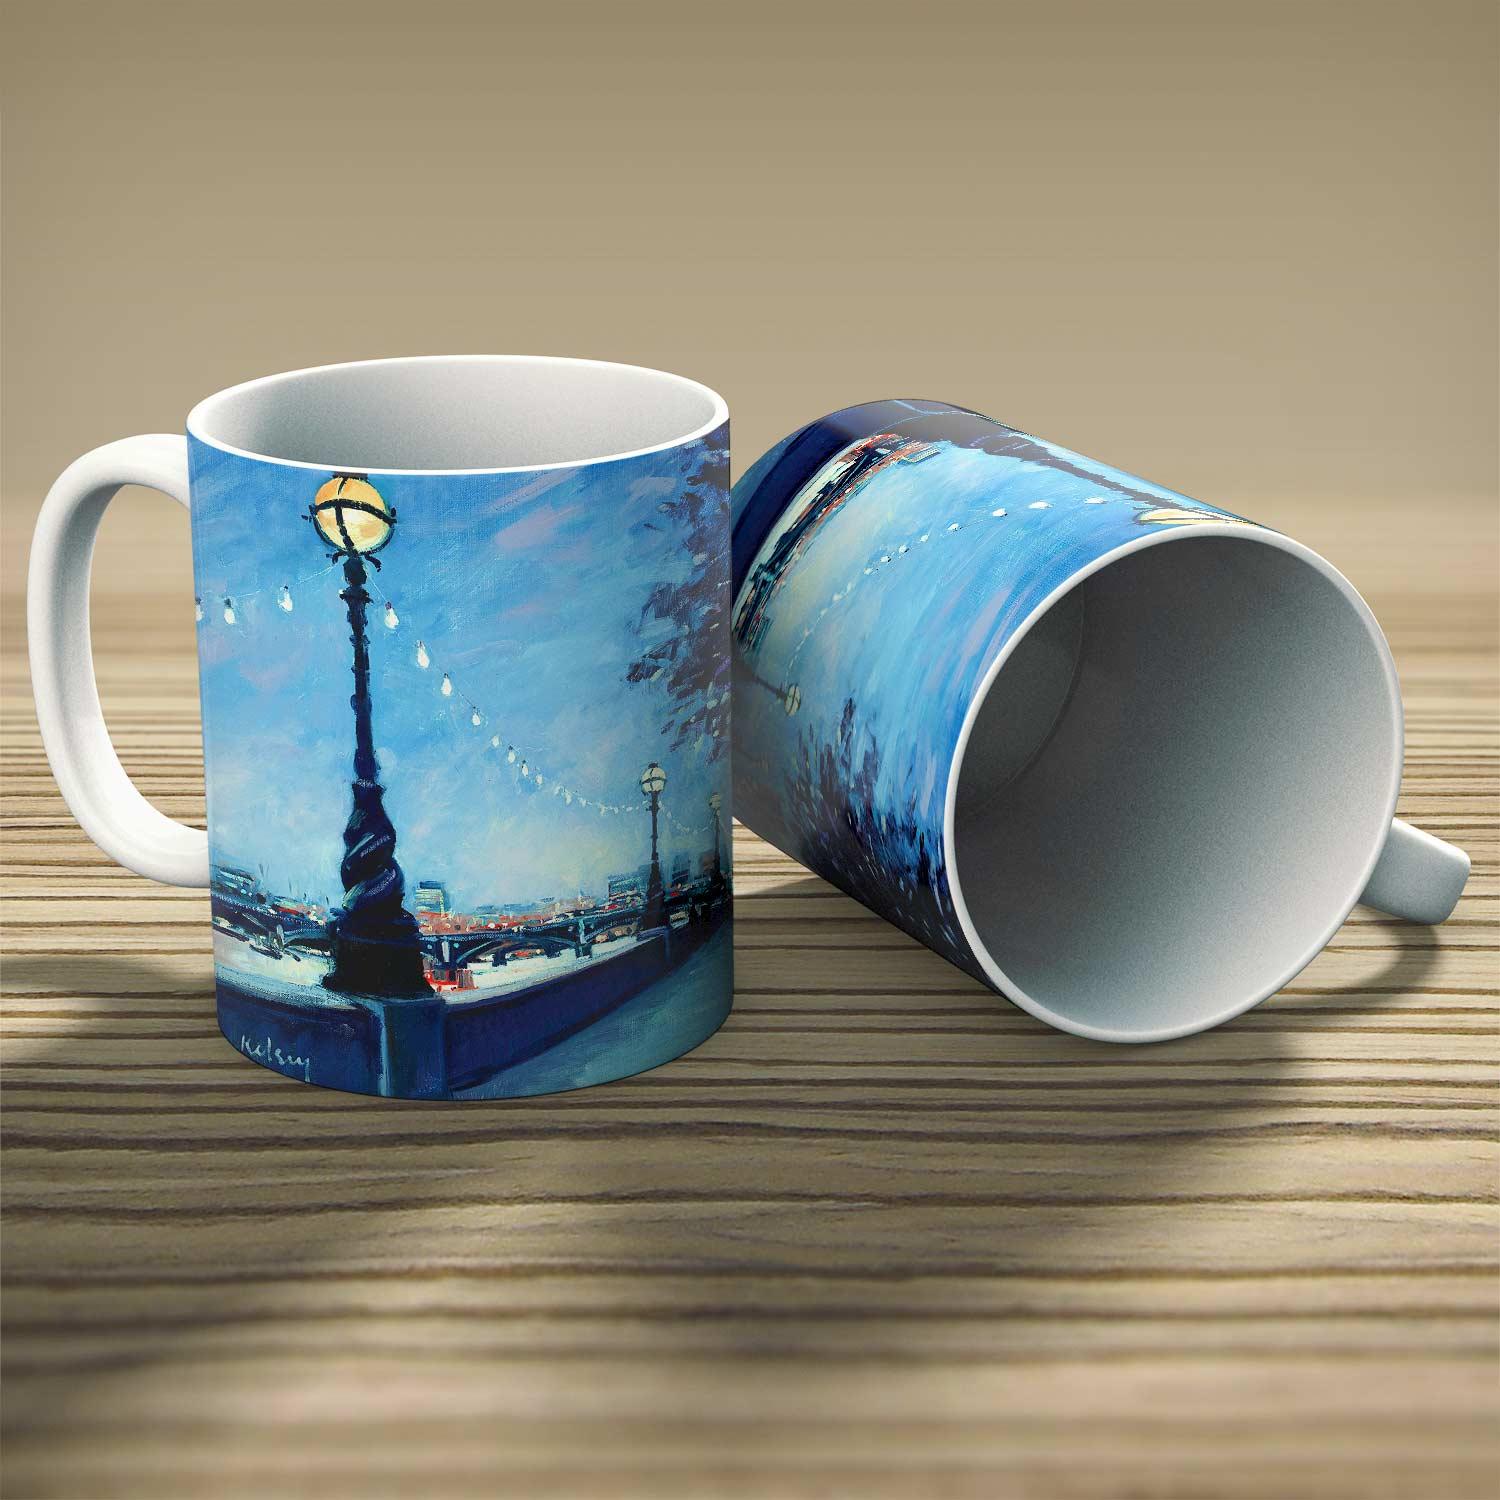 The Embankment by Night Mug from an original painting by artist Robert Kelsey